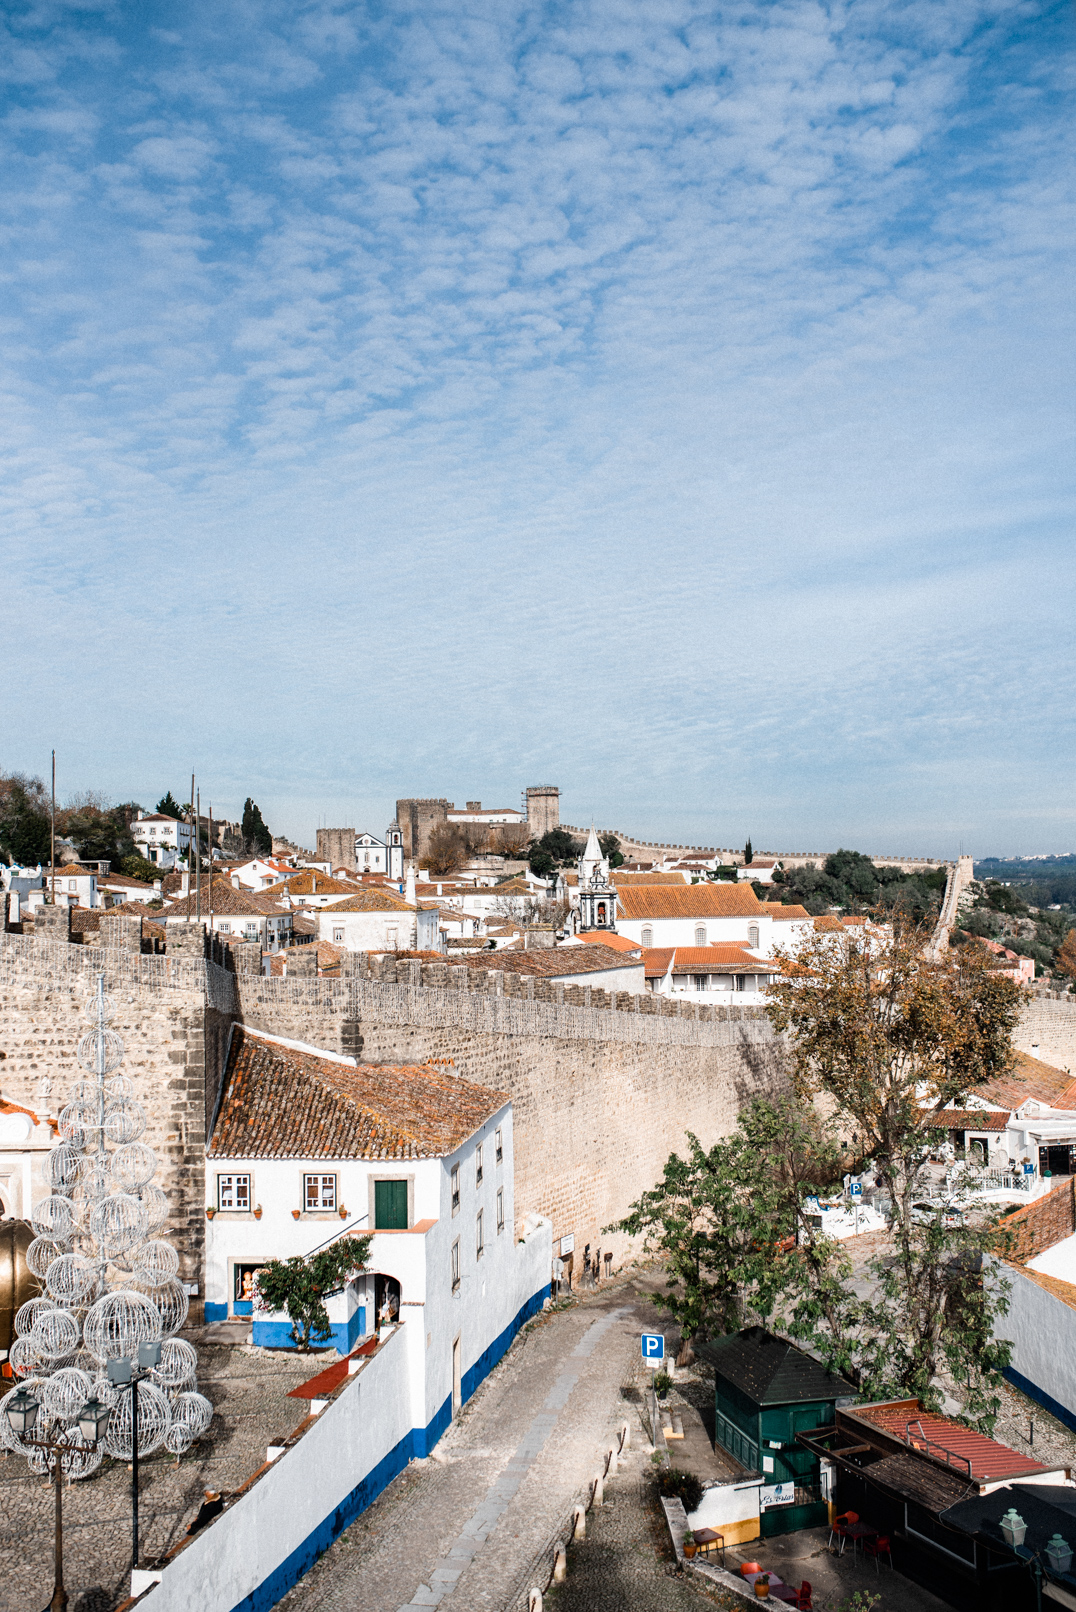 Óbidos Christmas Market - View of the town from the Ferris wheel